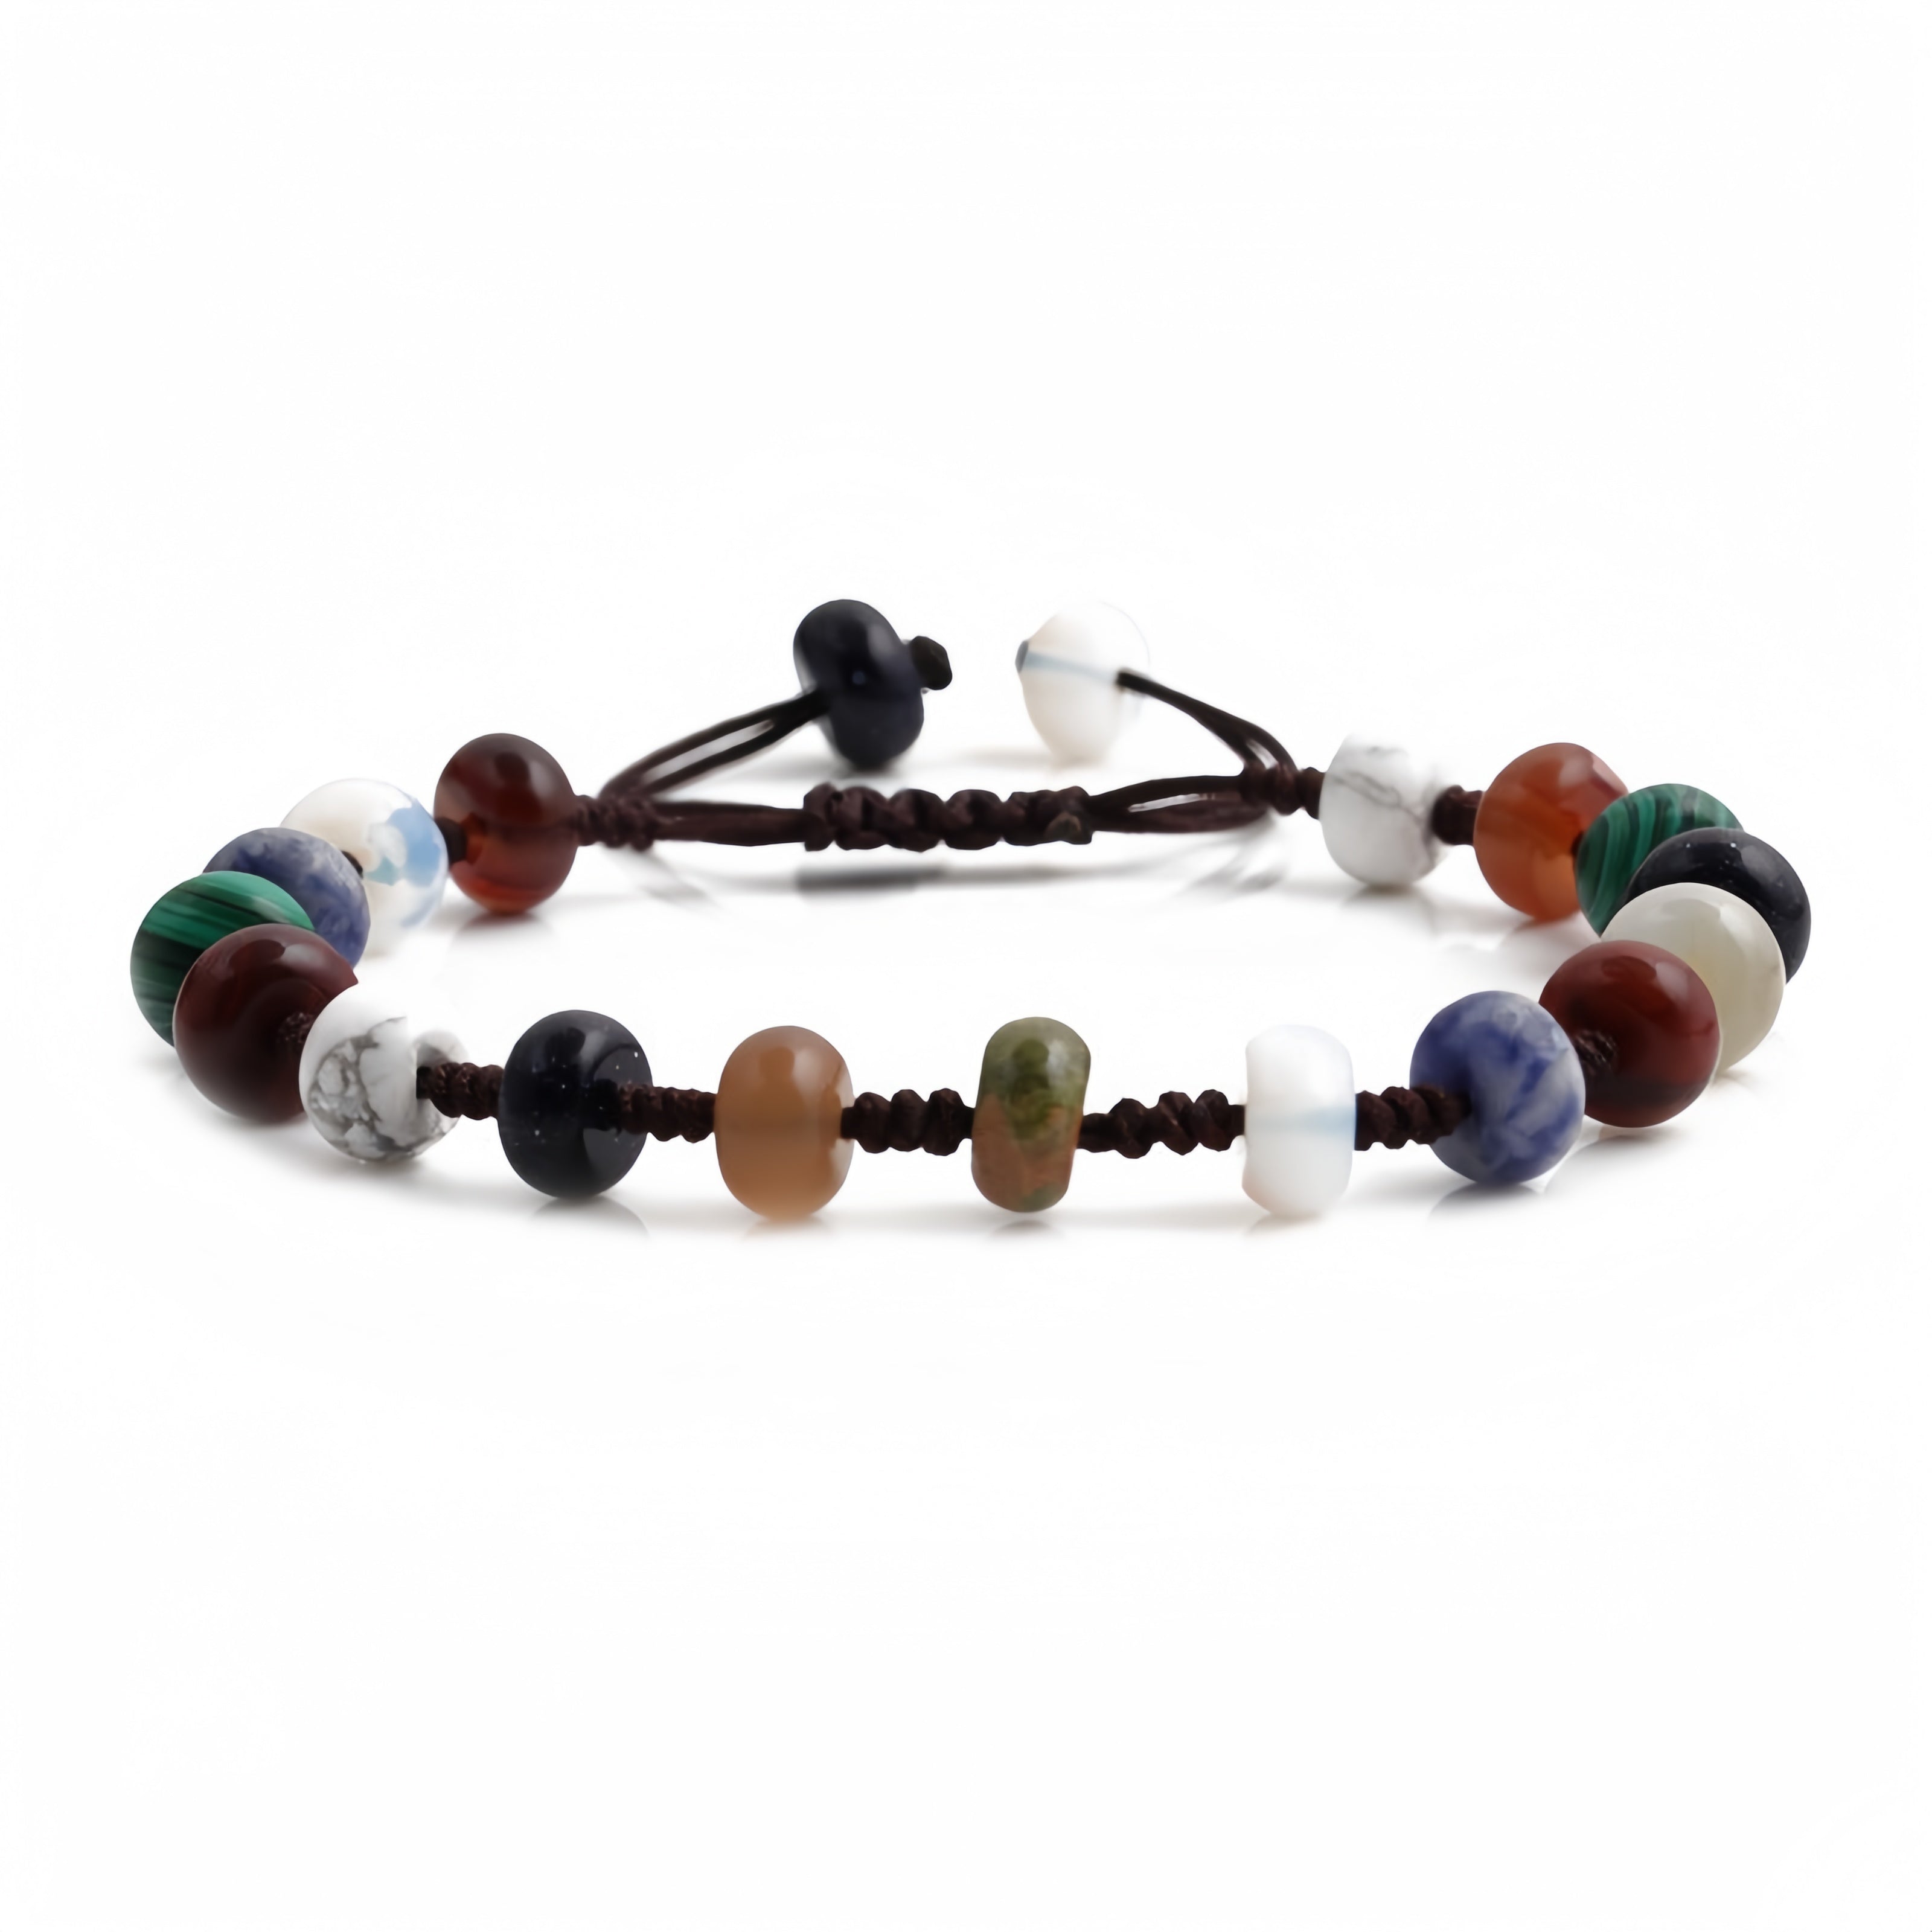 Detailed view of the multicolored seven chakra energy beaded bracelet